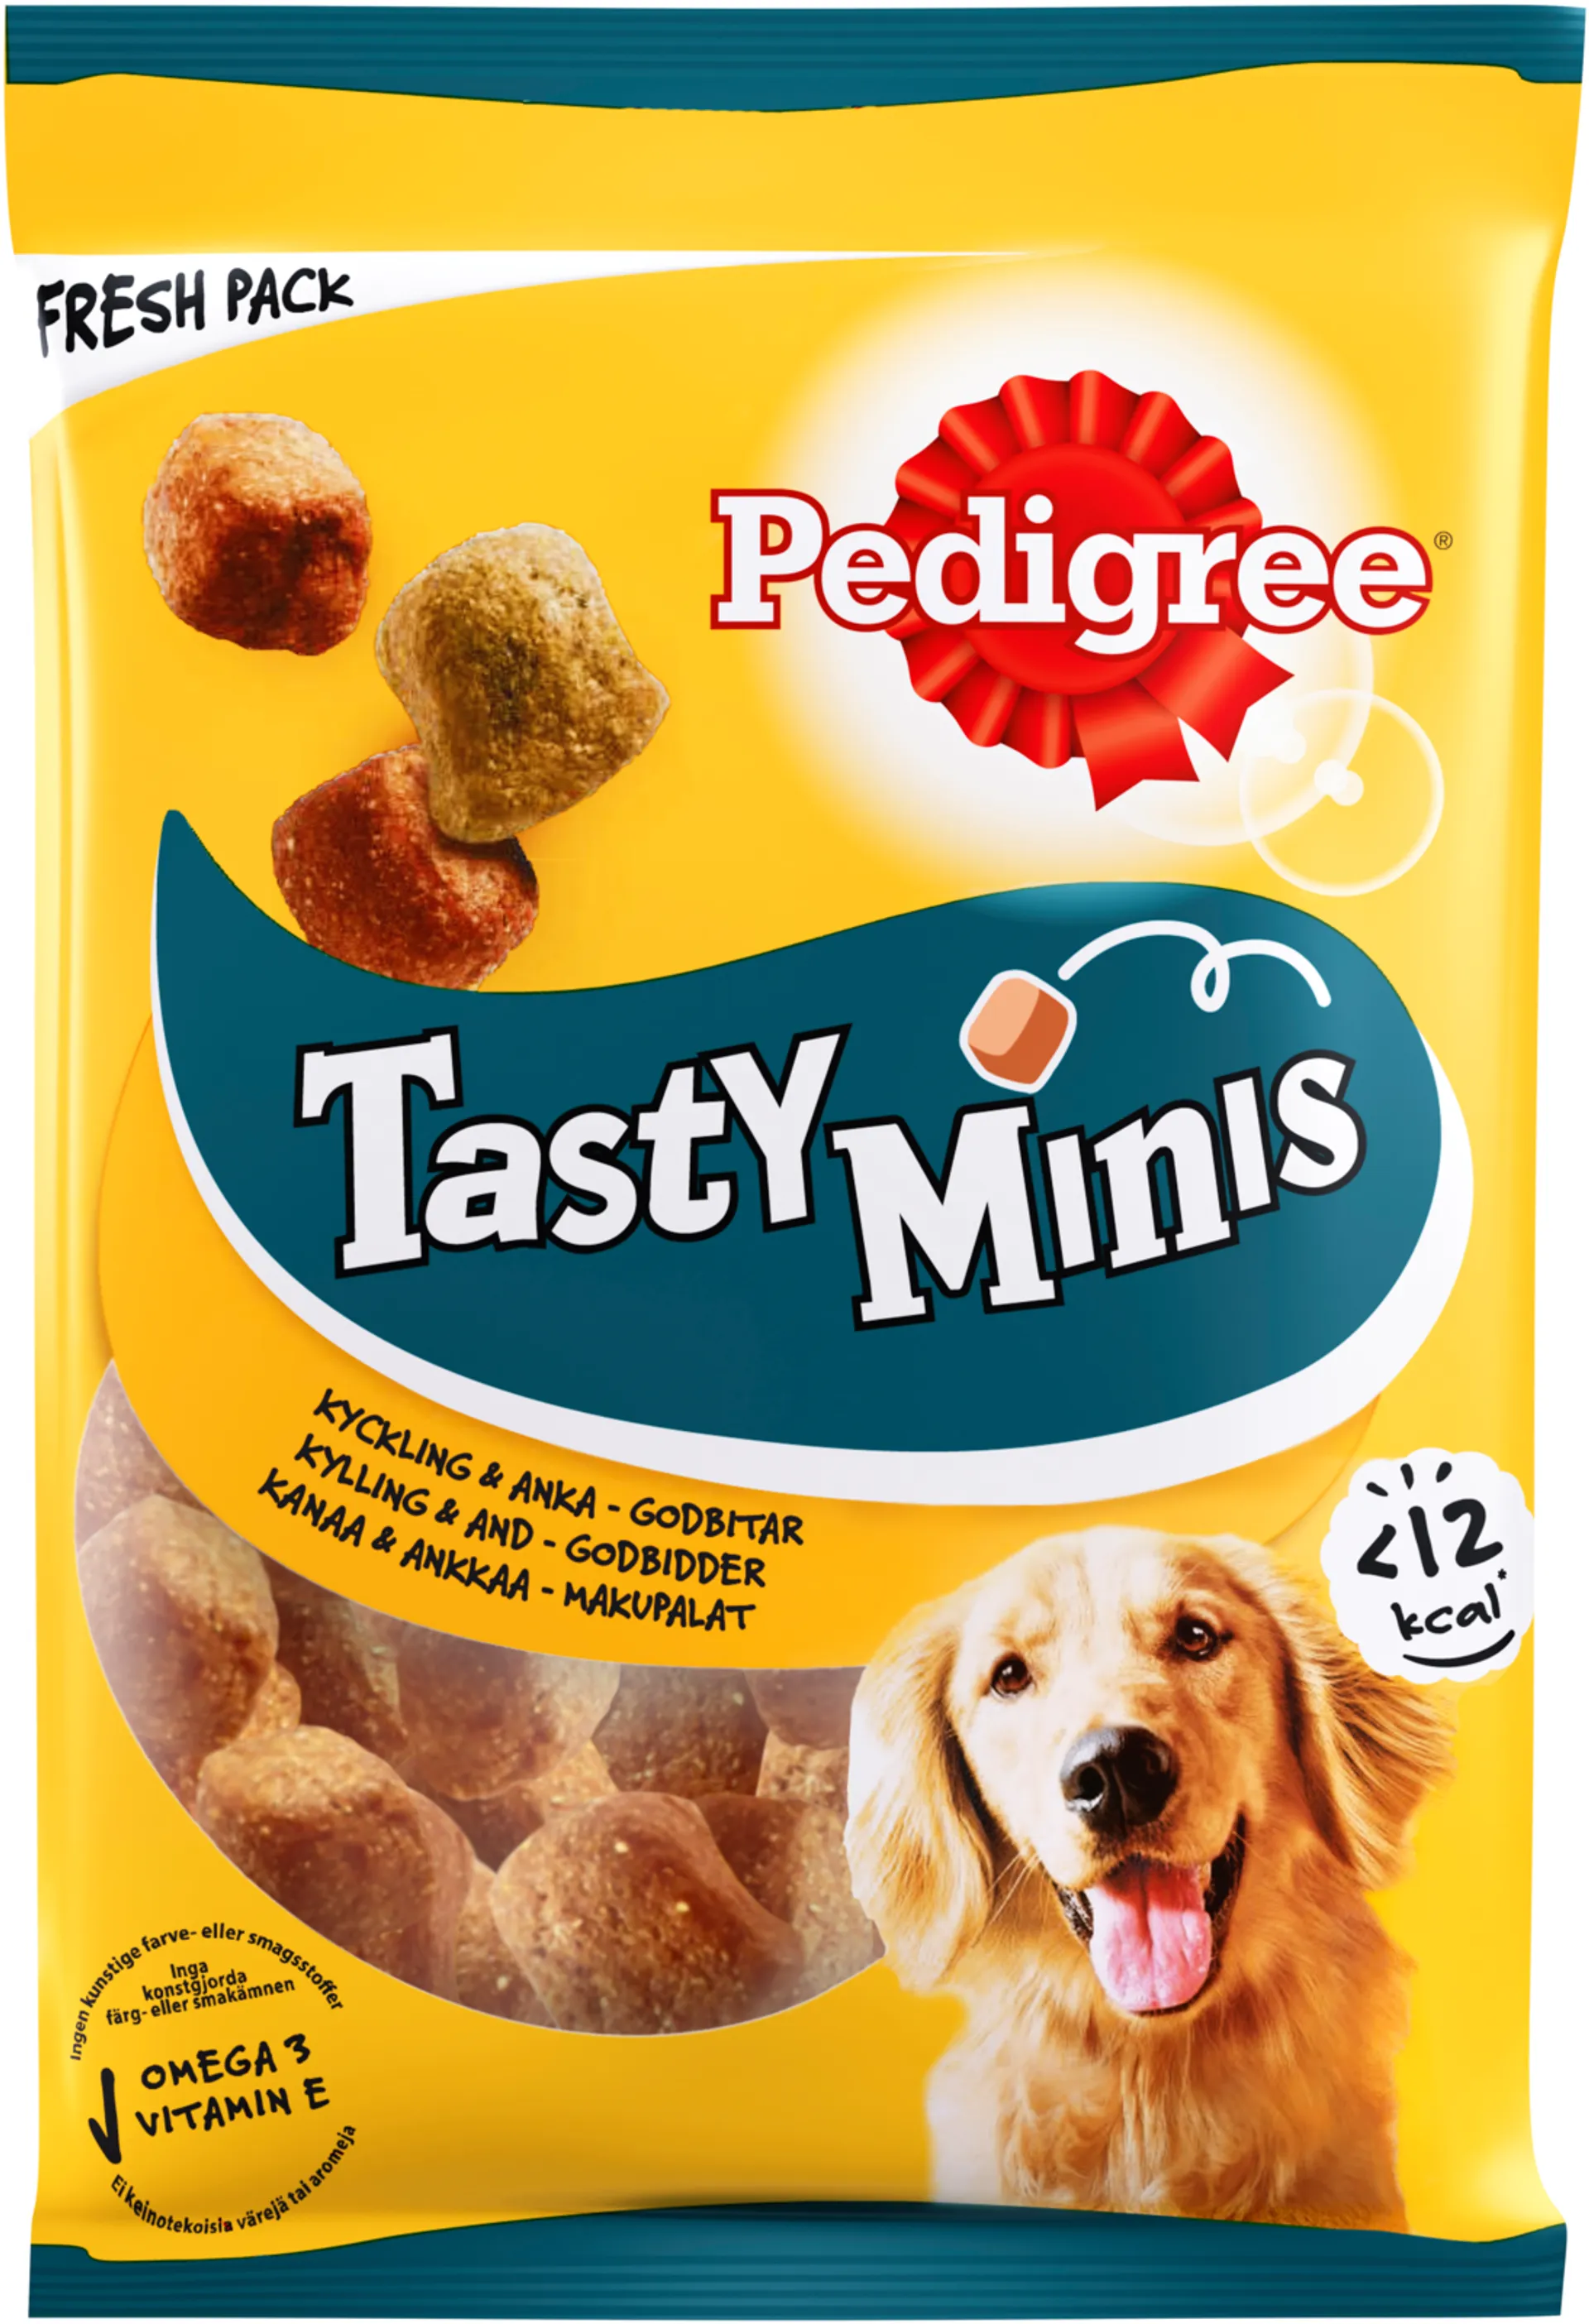 Pedigree Tasty Minis Chewy Cubes 130g